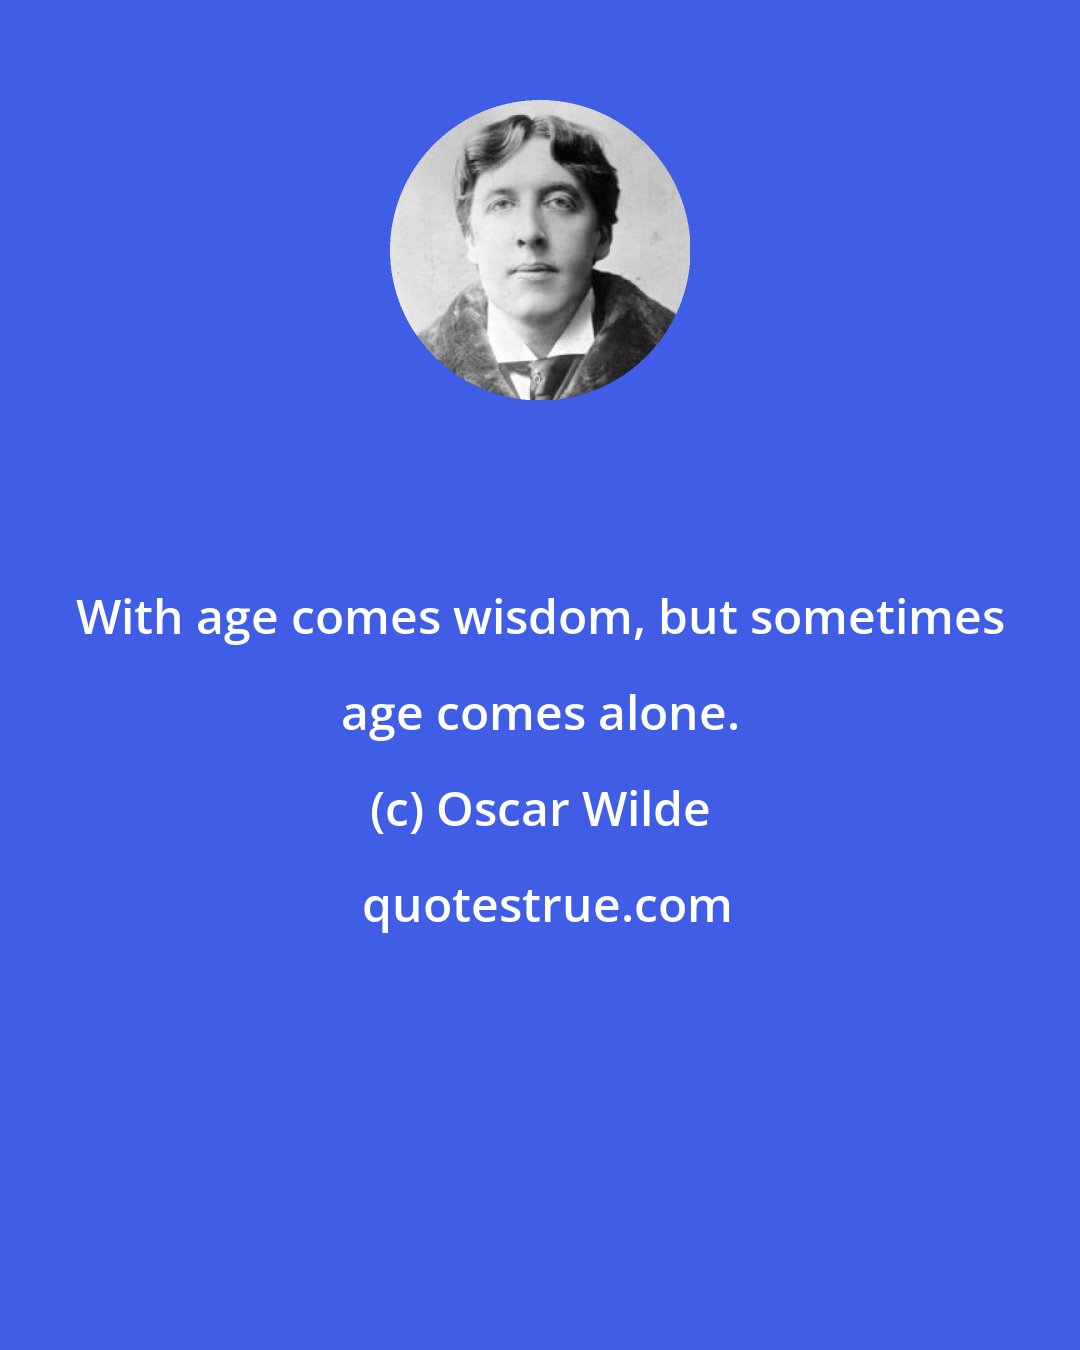 Oscar Wilde: With age comes wisdom, but sometimes age comes alone.